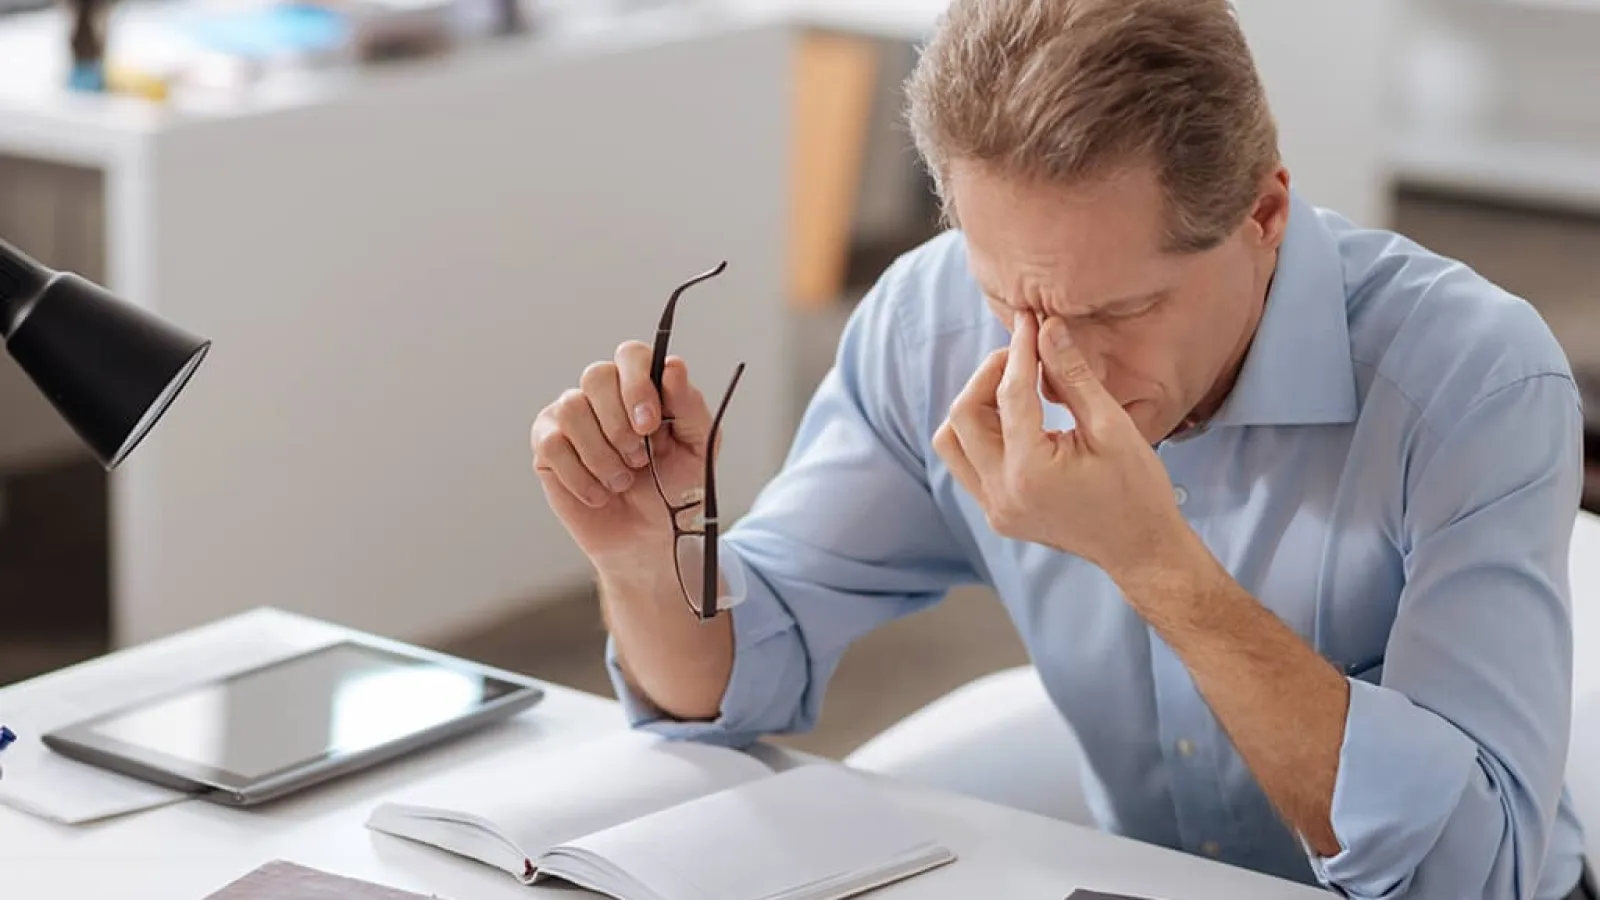 How Offices Can Reduce Sick Building Syndrome Risks